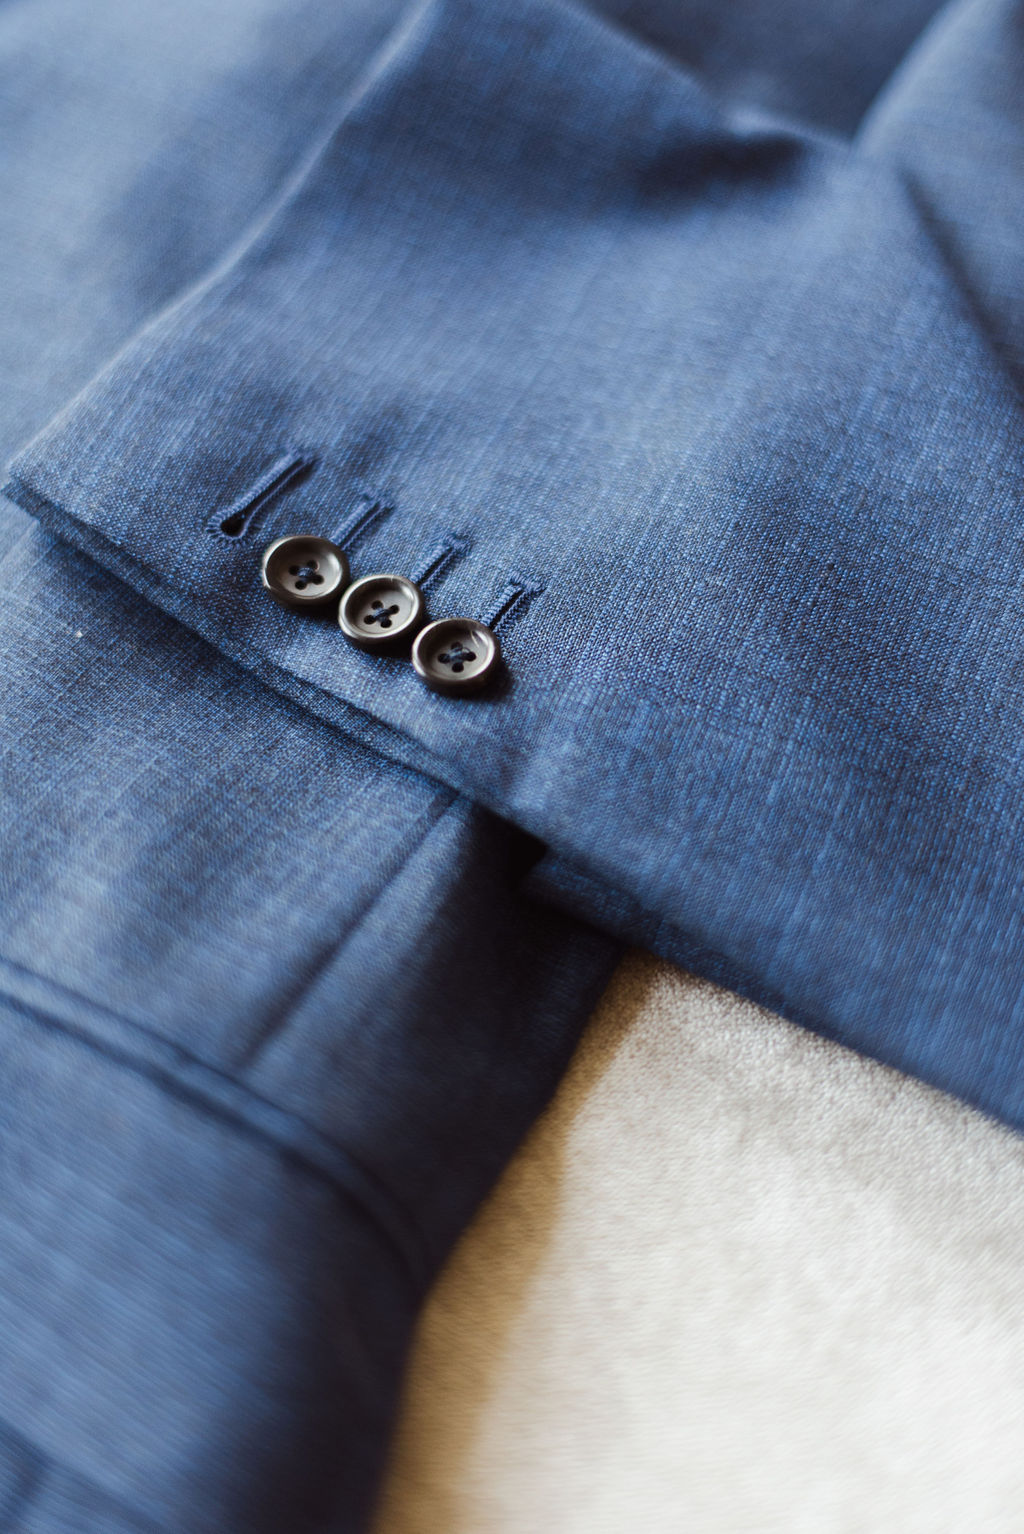 A blue suit with gunmetal silver buttons on the cuff